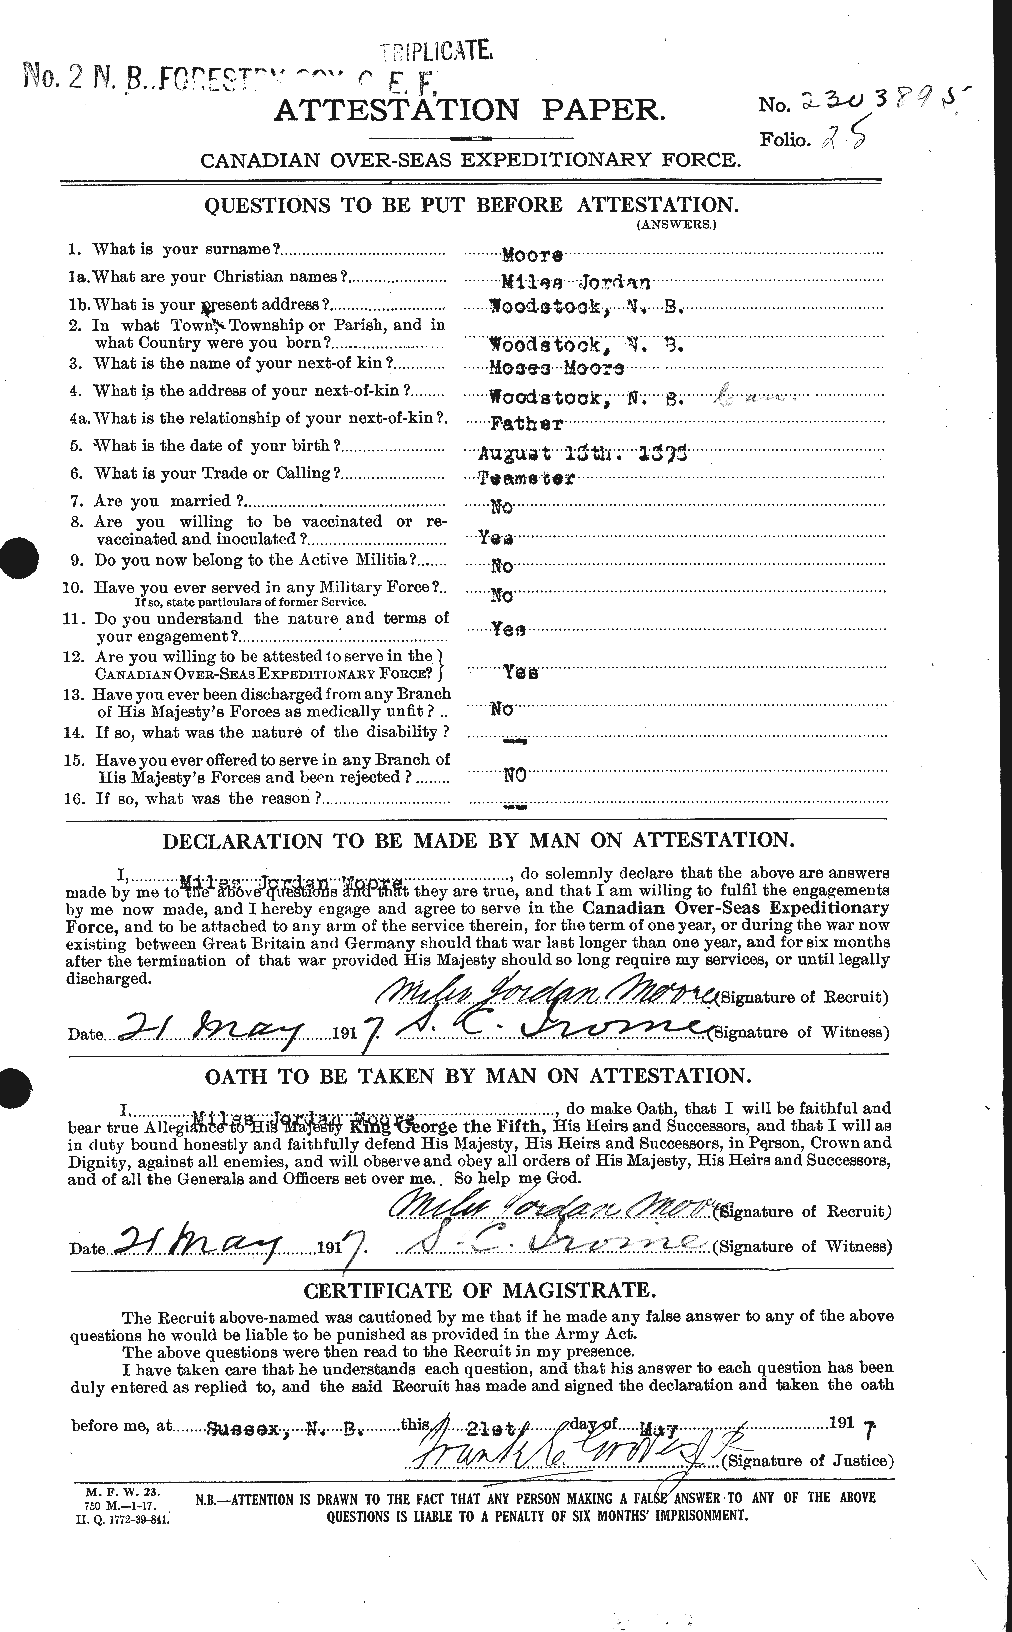 Personnel Records of the First World War - CEF 503445a